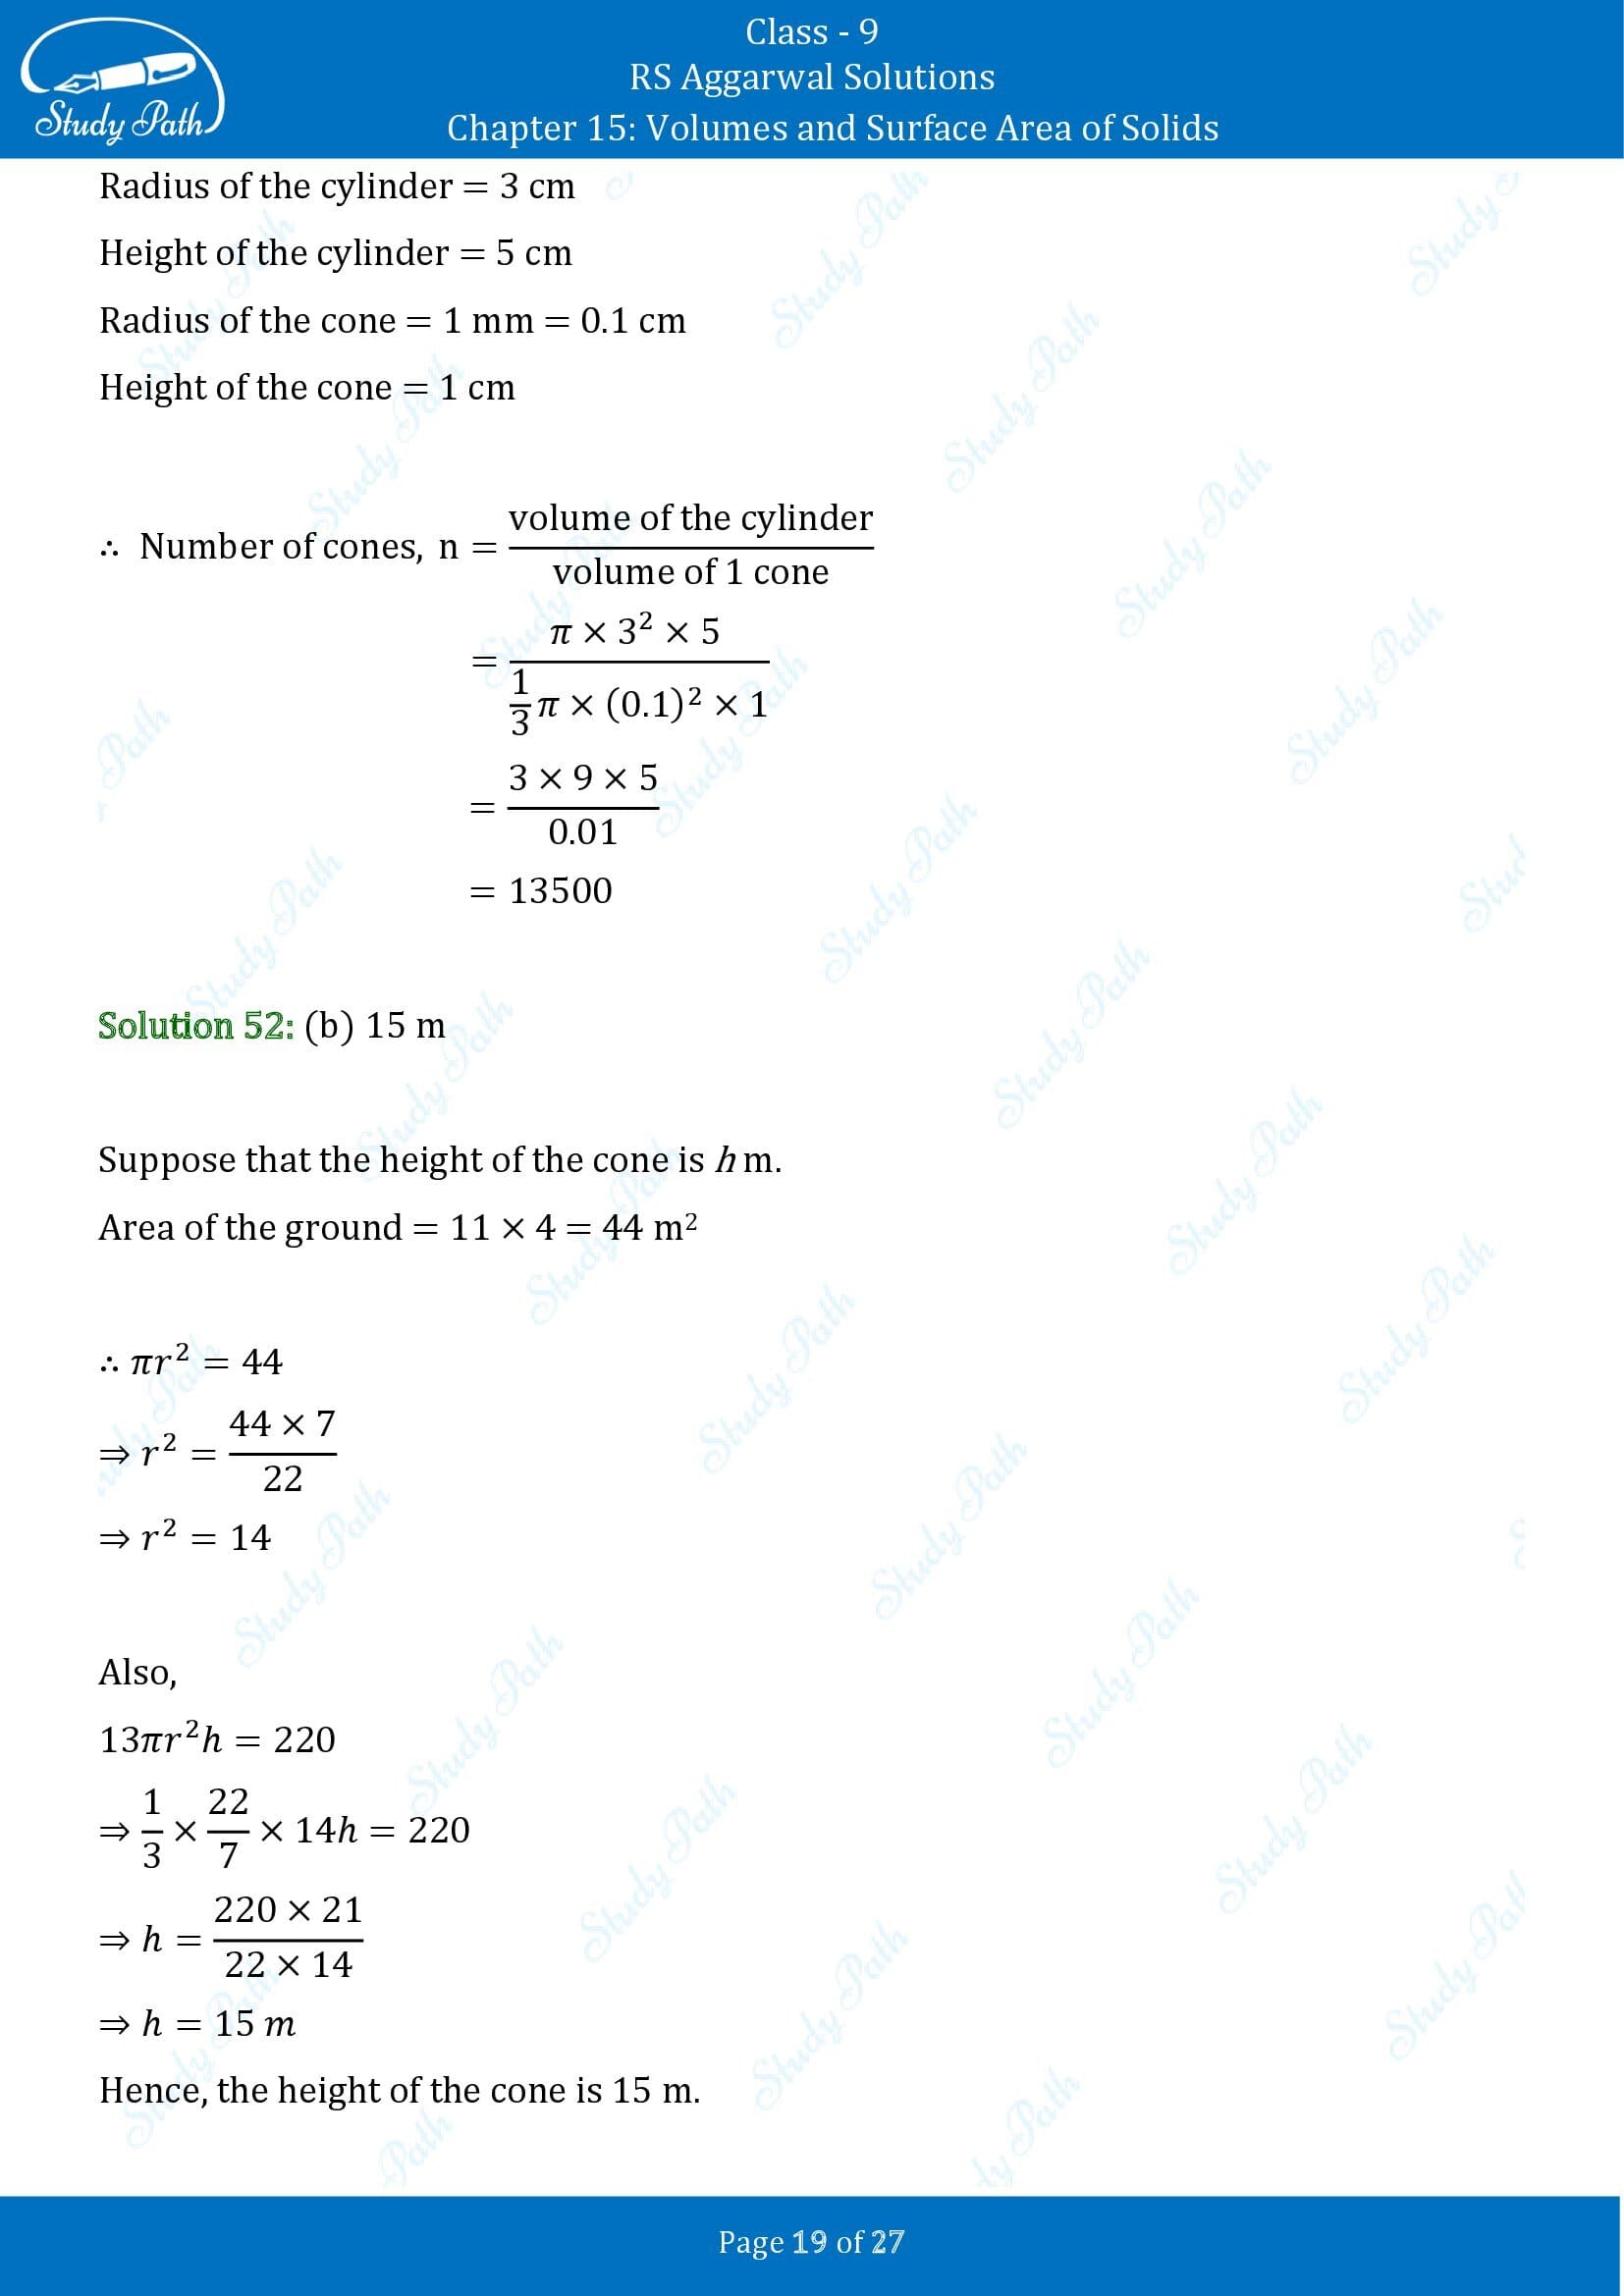 RS Aggarwal Solutions Class 9 Chapter 15 Volumes and Surface Area of Solids Multiple Choice Questions MCQs 00019